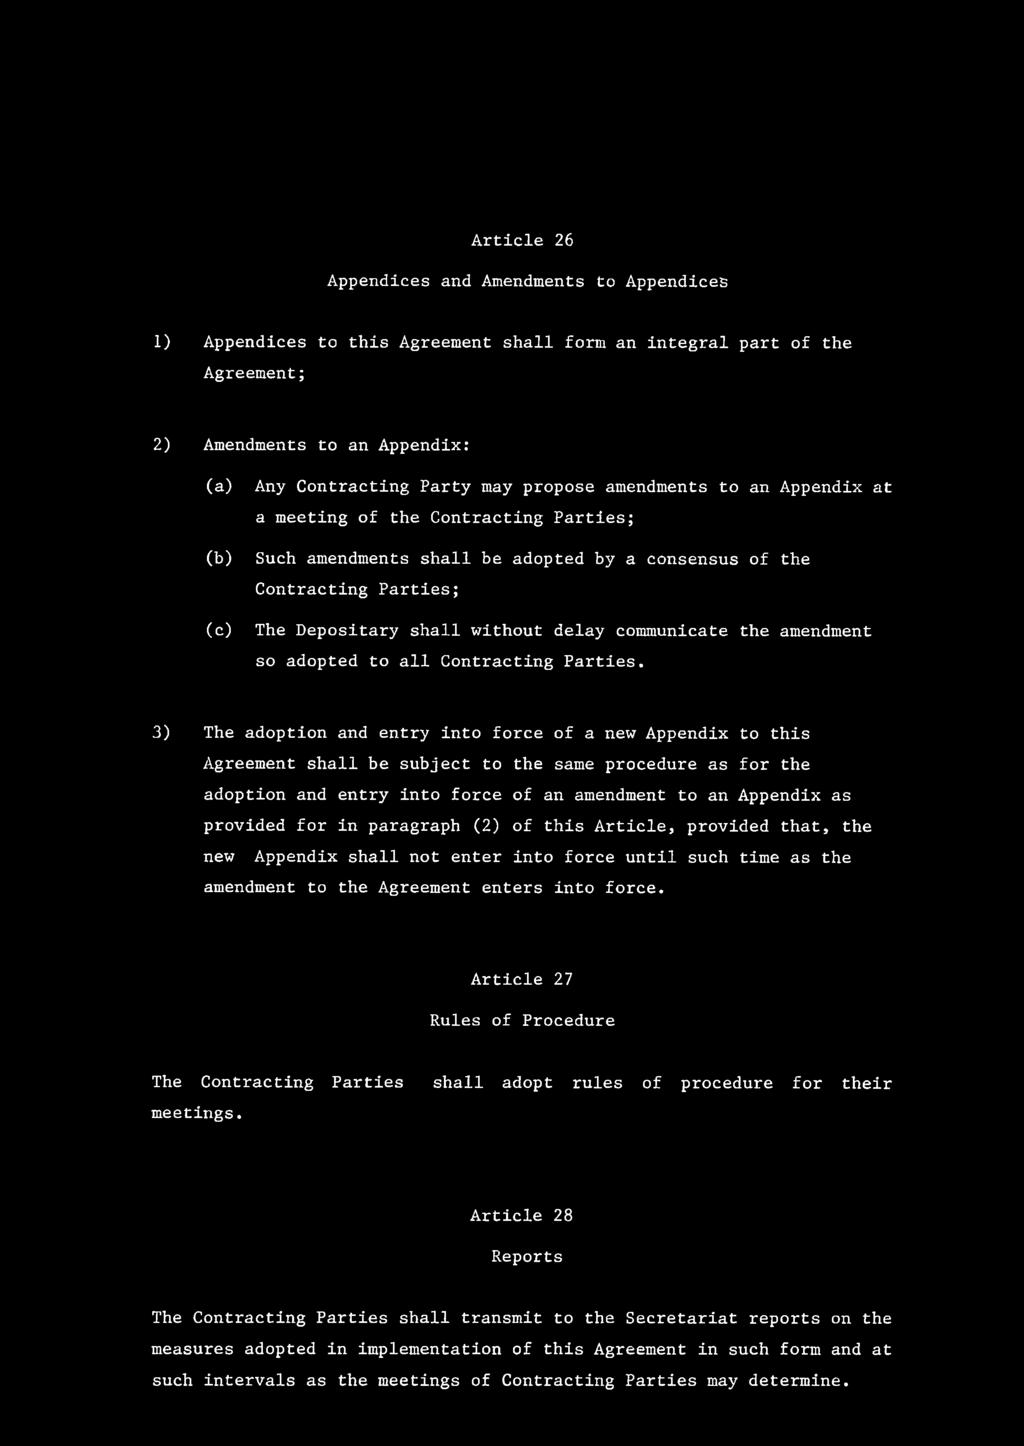 the amendment so adopted to all Contracting Parties.